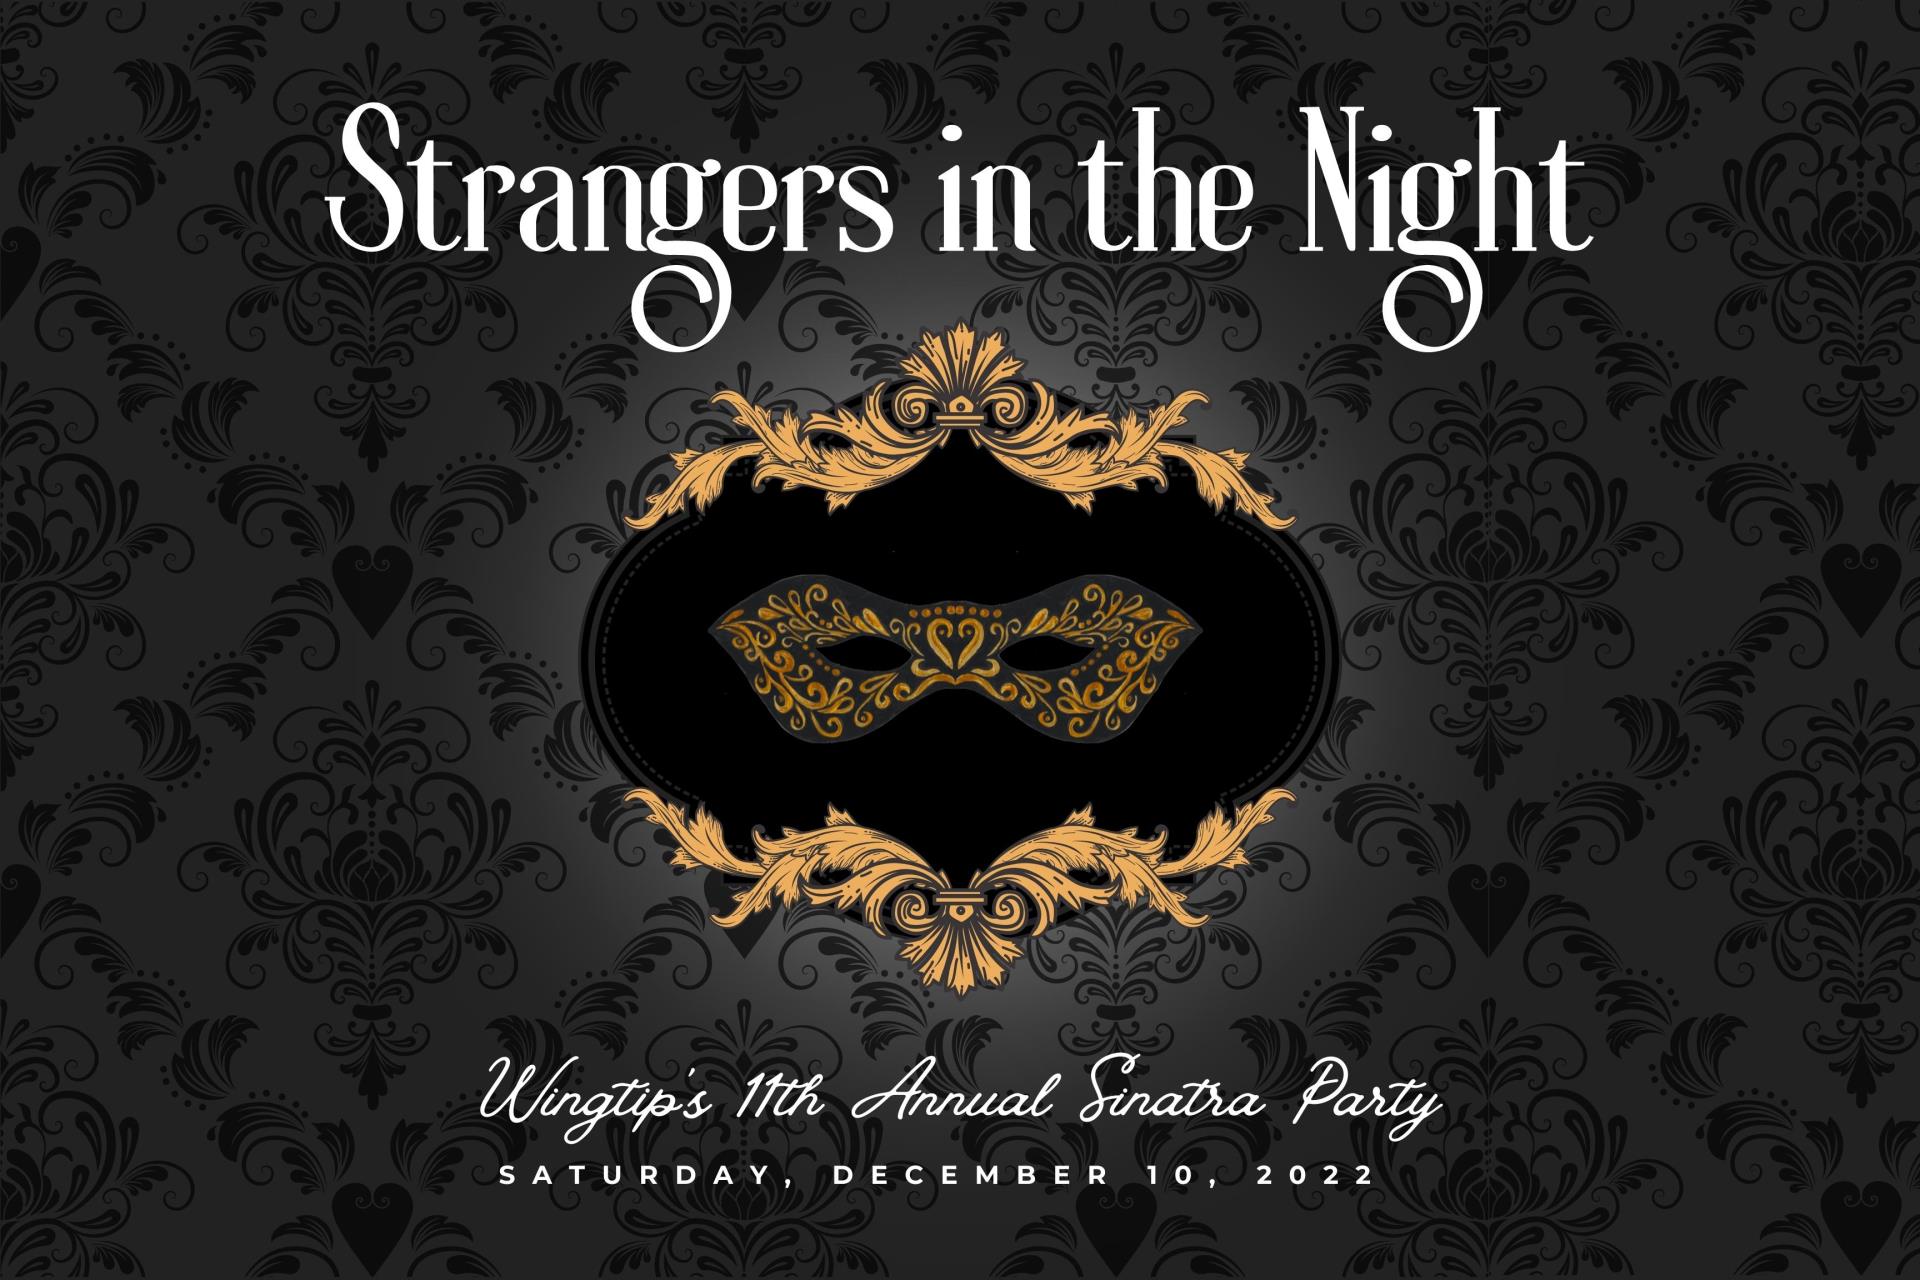 11th Annual Sinatra Party: Strangers in the Night - A Masquerade